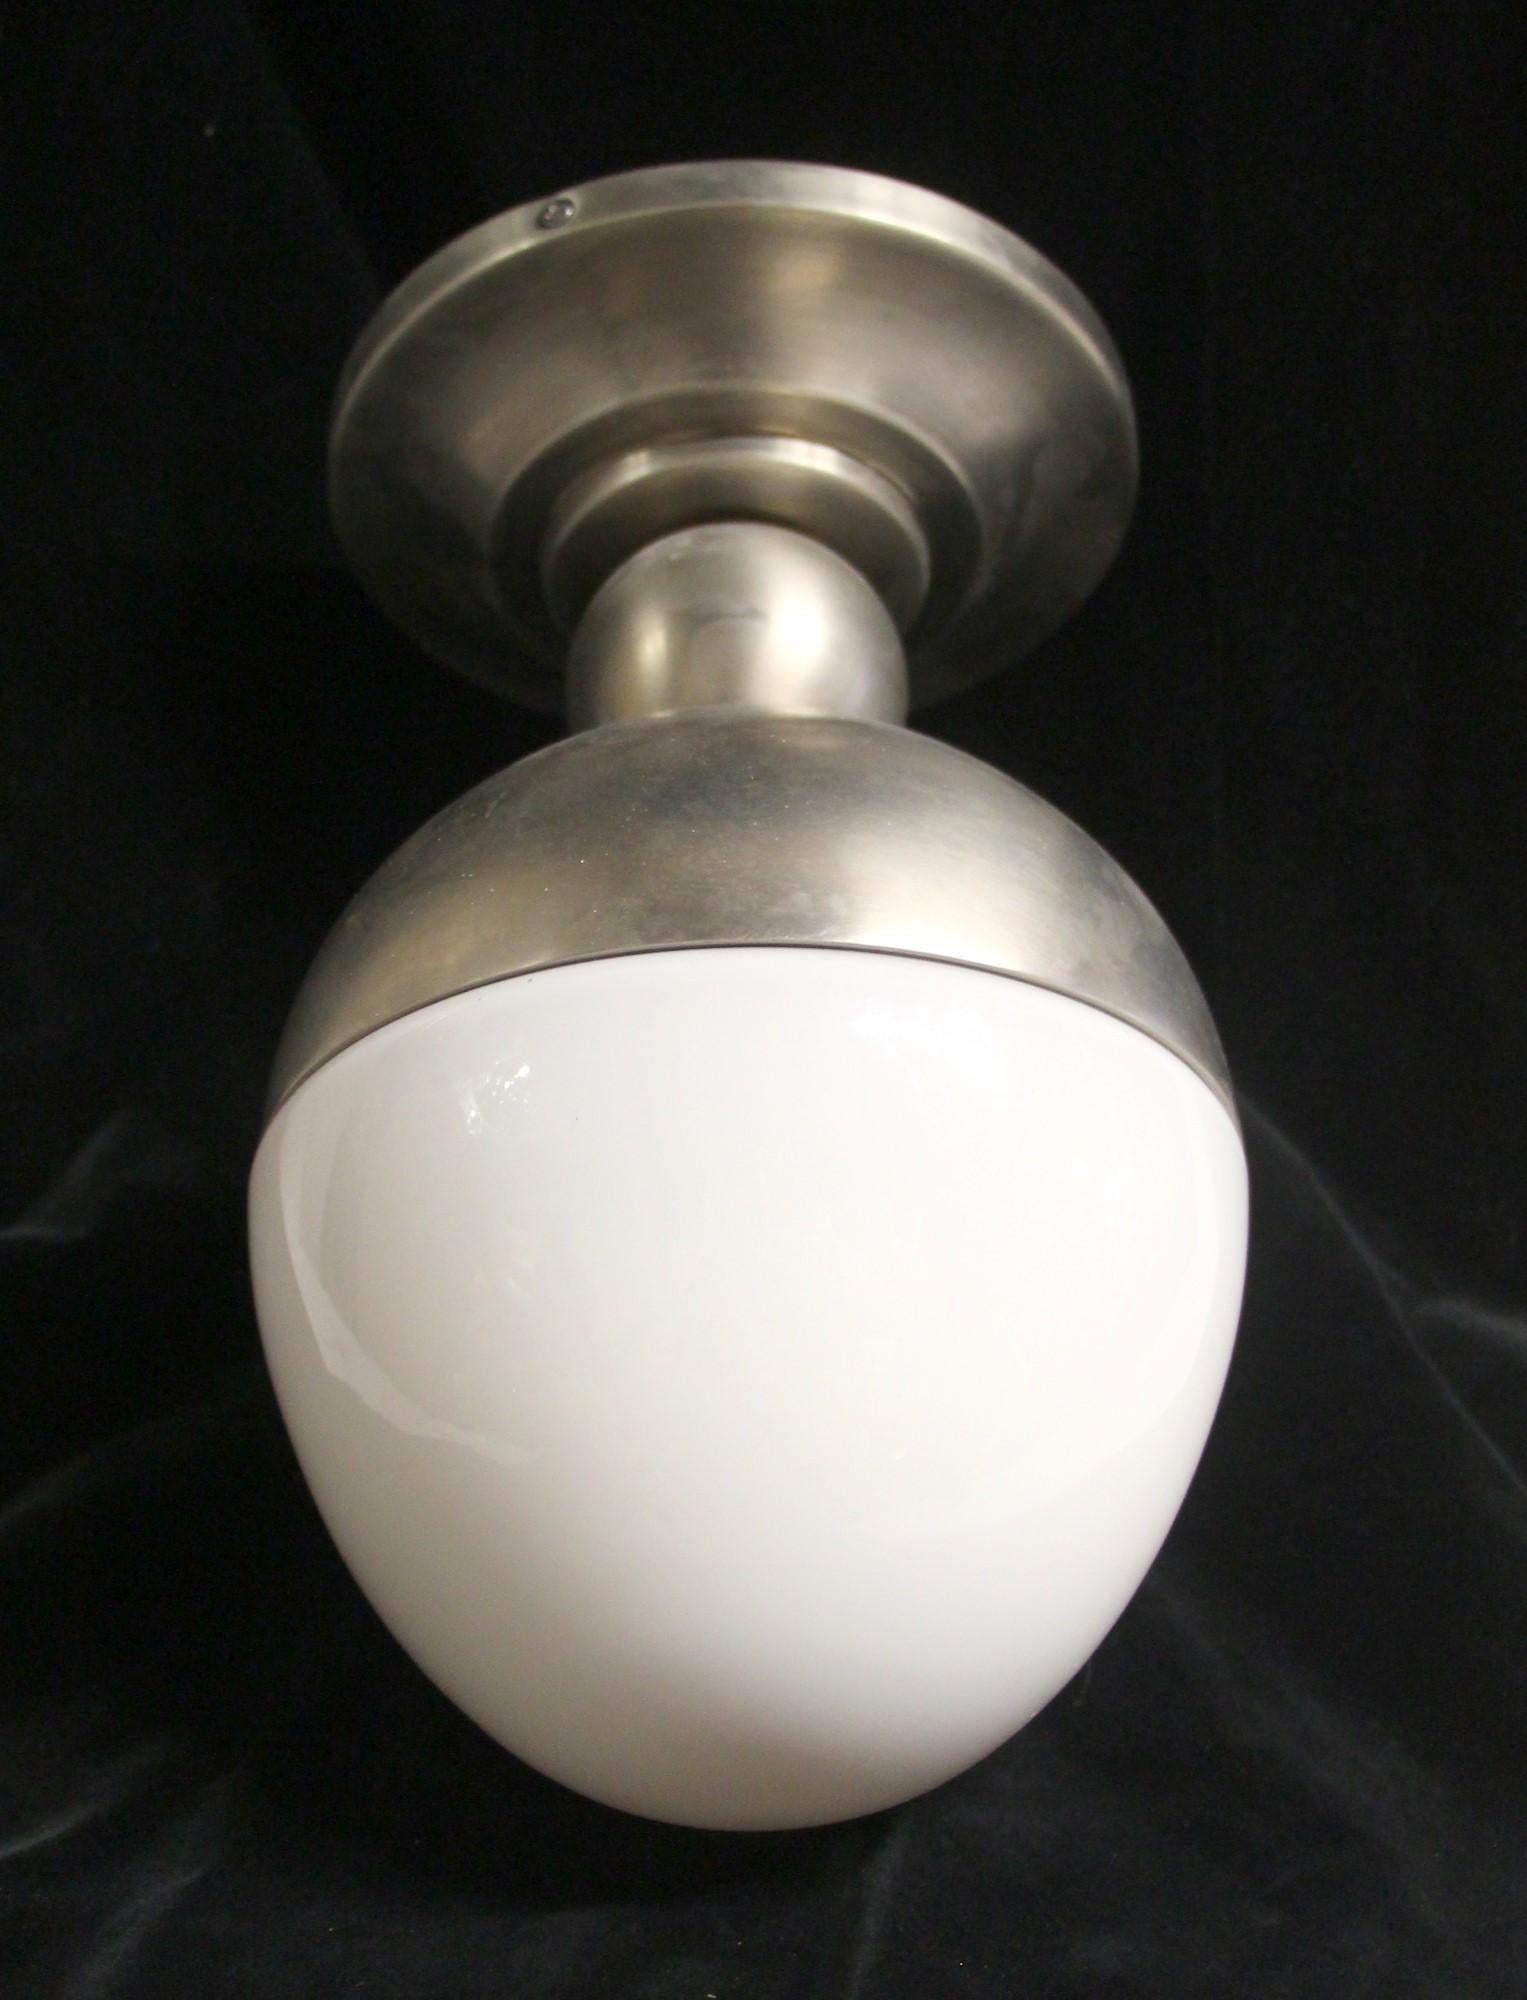 Modern style white milk glass egg light with a satin nickel finish and steel base. This can be seen at our 302 Bowery location in NoHo in Manhattan.